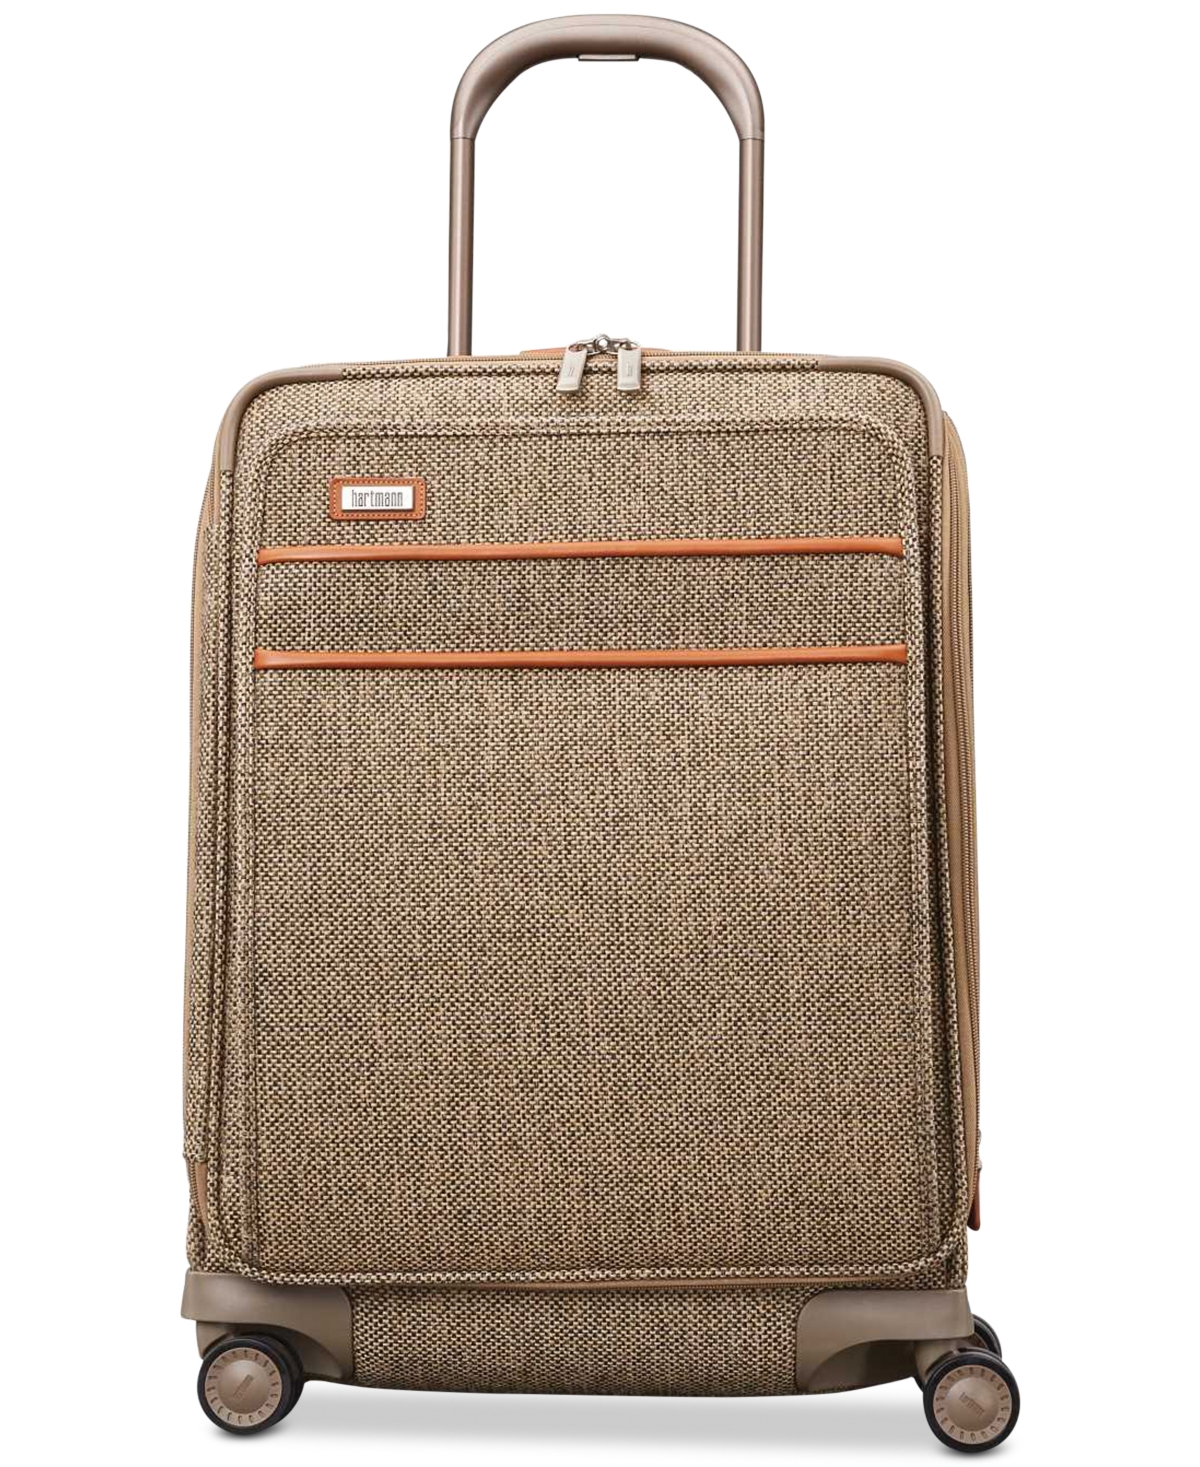 Tweed Legend 21" Domestic Carry-On Expandable Spinner Suitcase - Natural Tweed